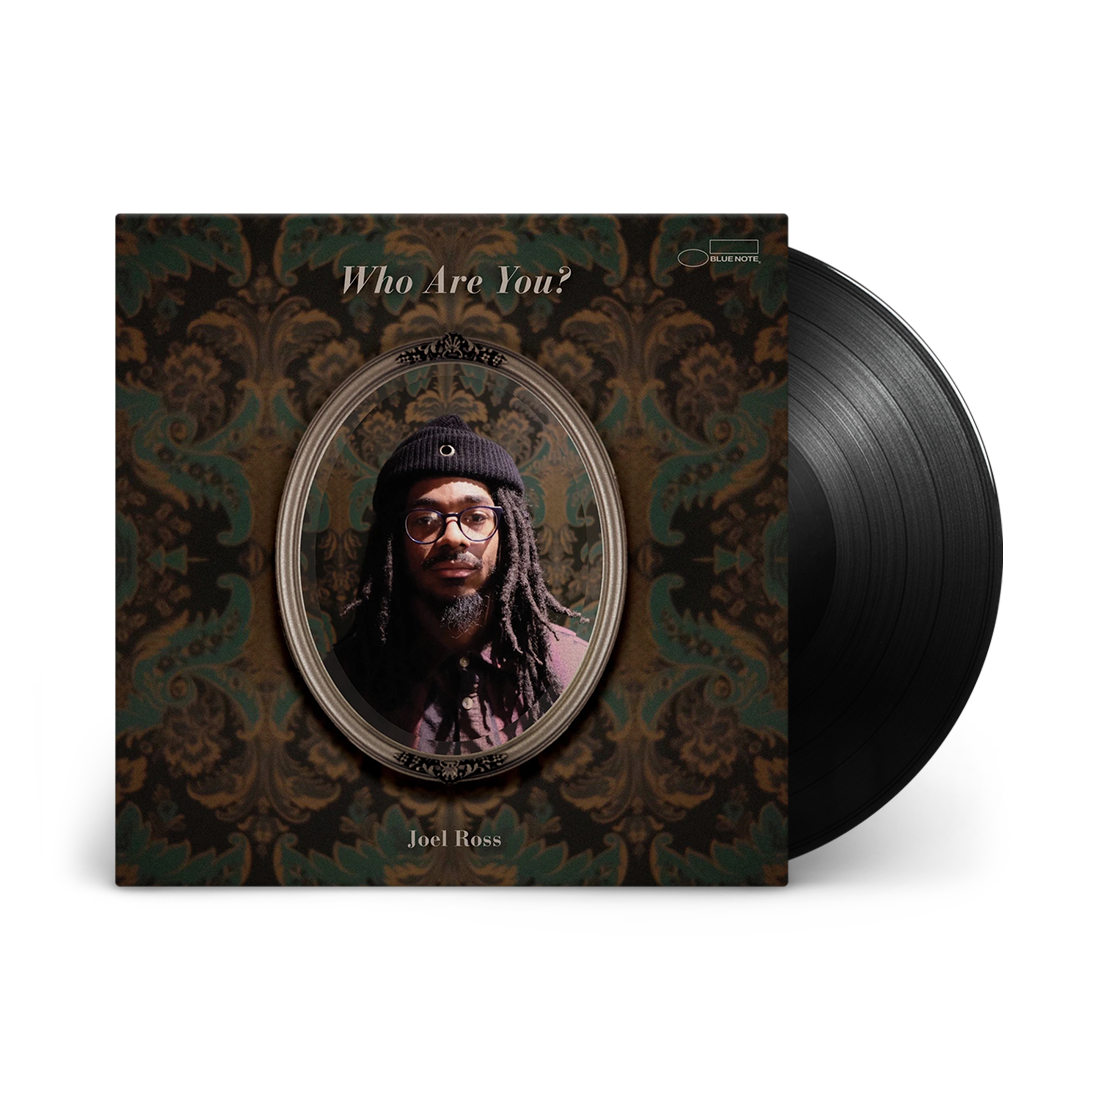 Who Are You?: Vinyl LP